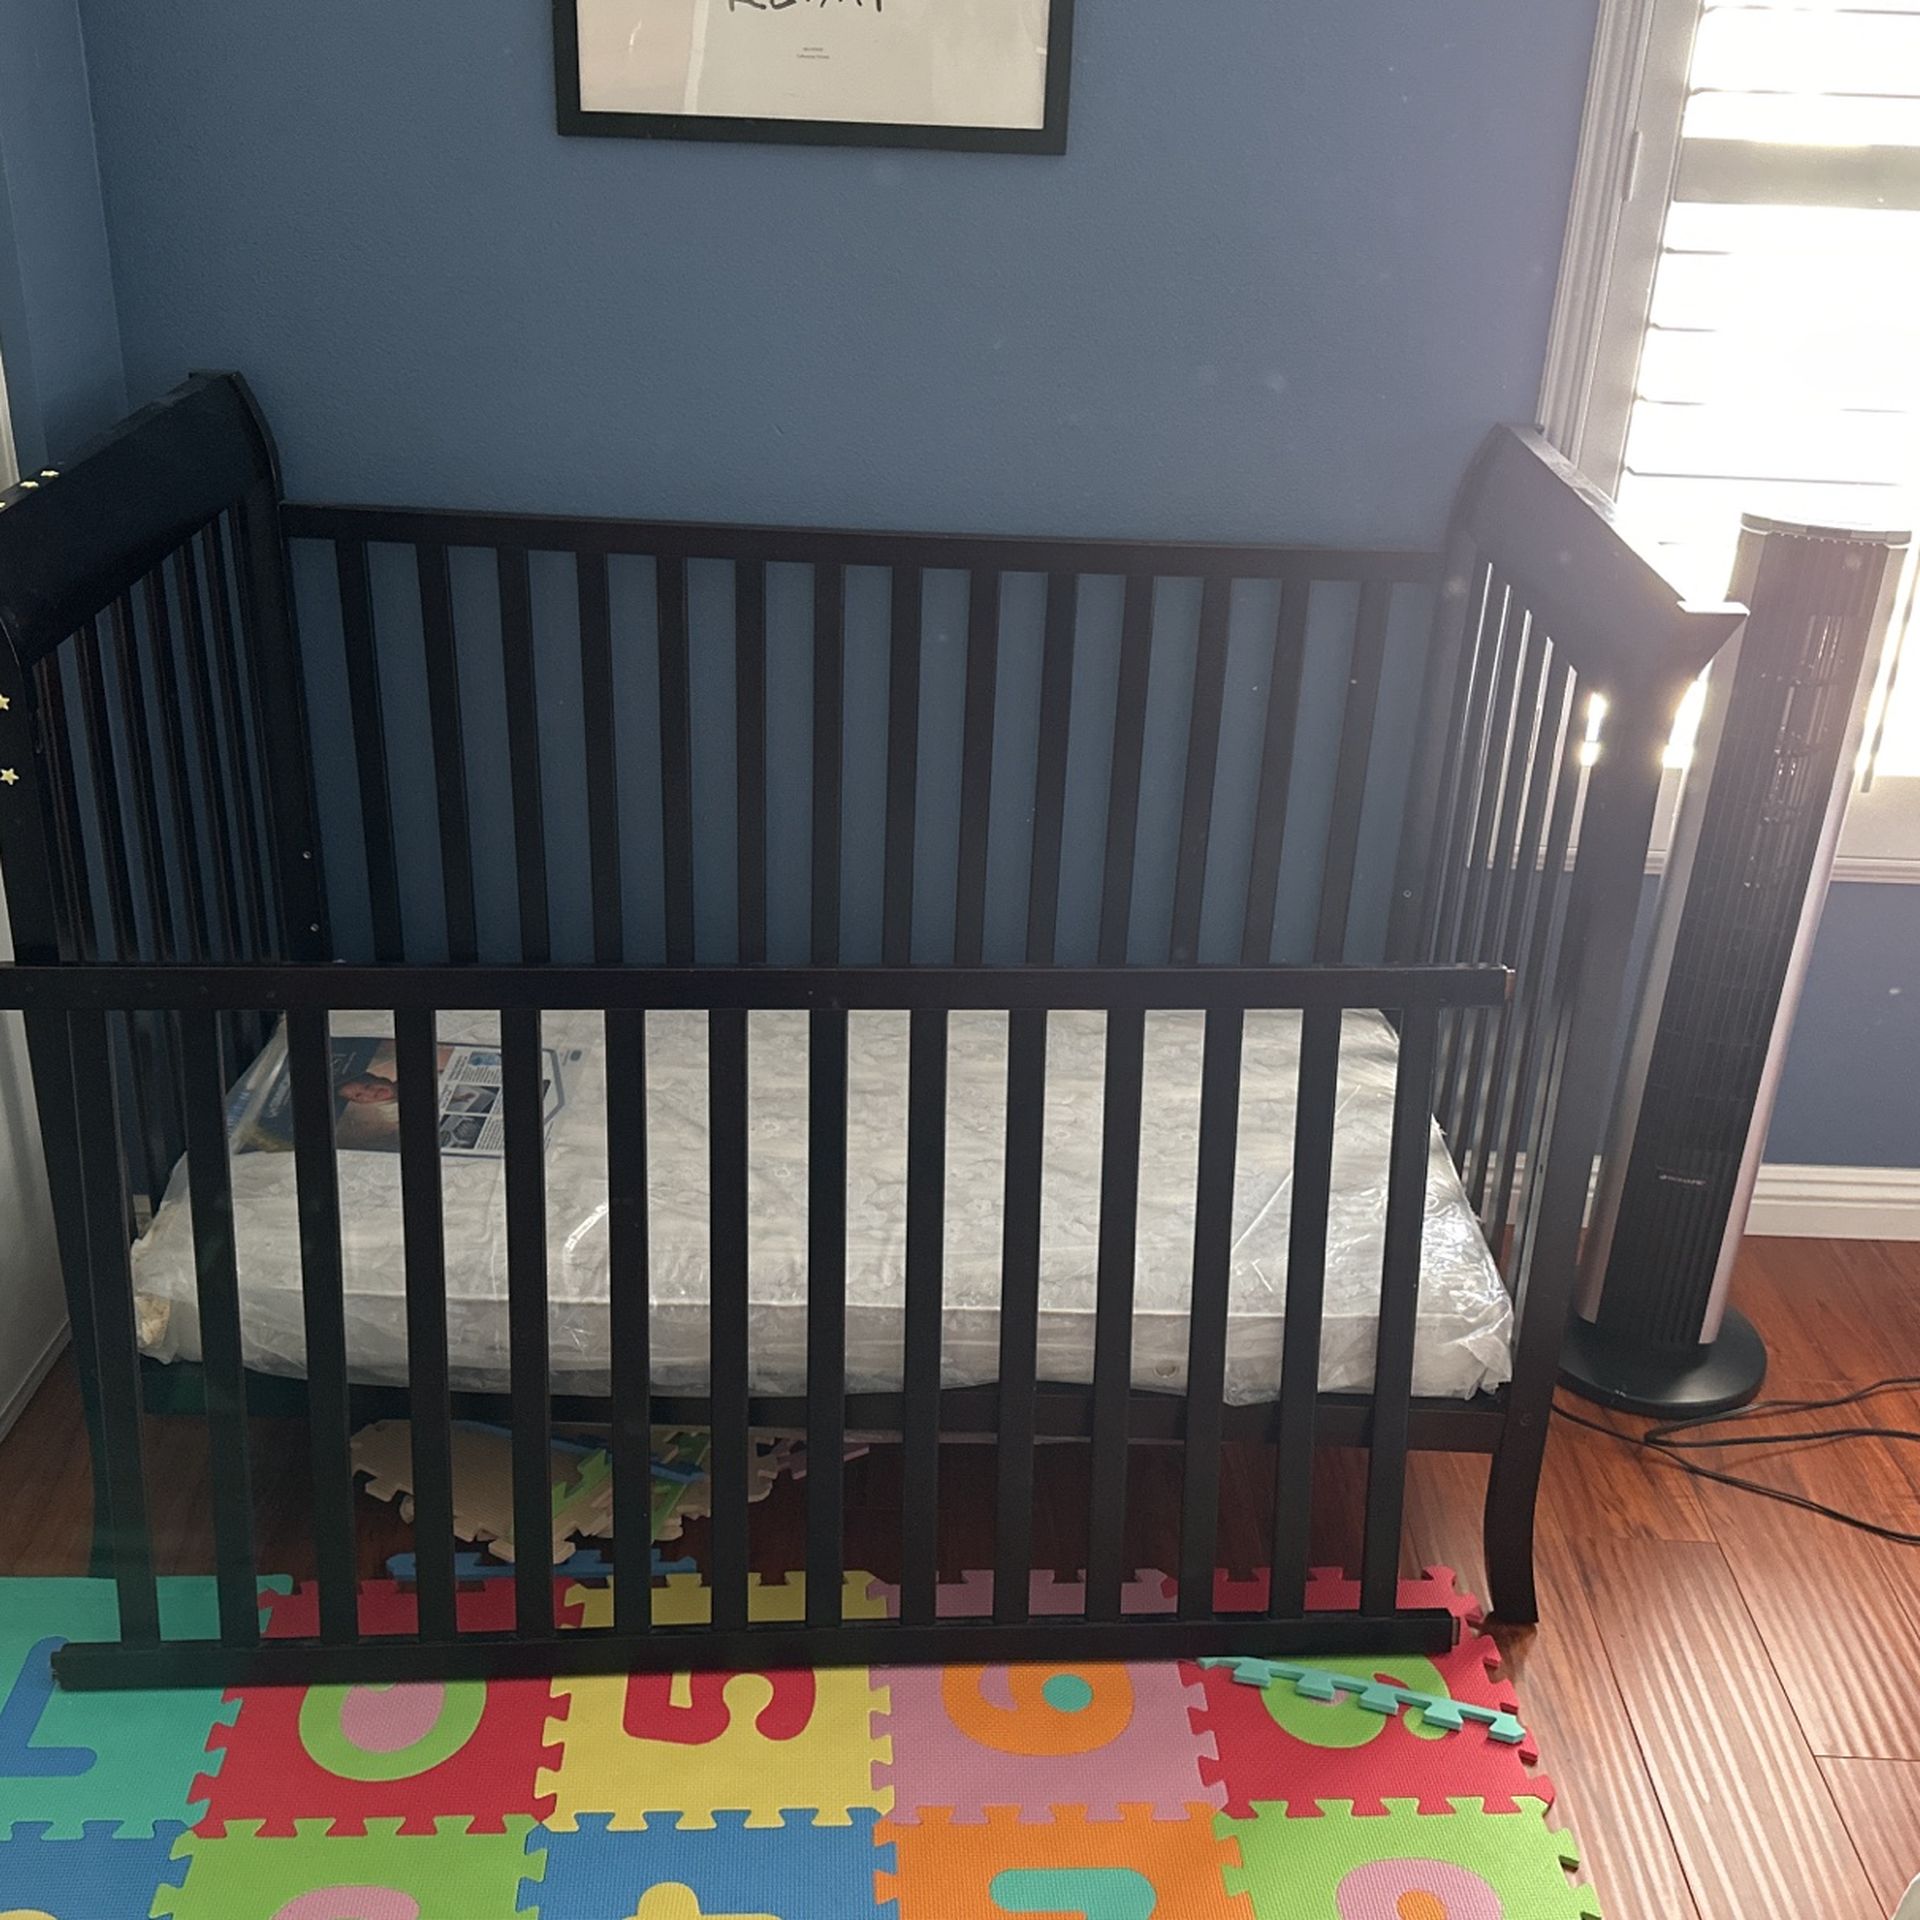 Baby Crib w/ Bed - Used